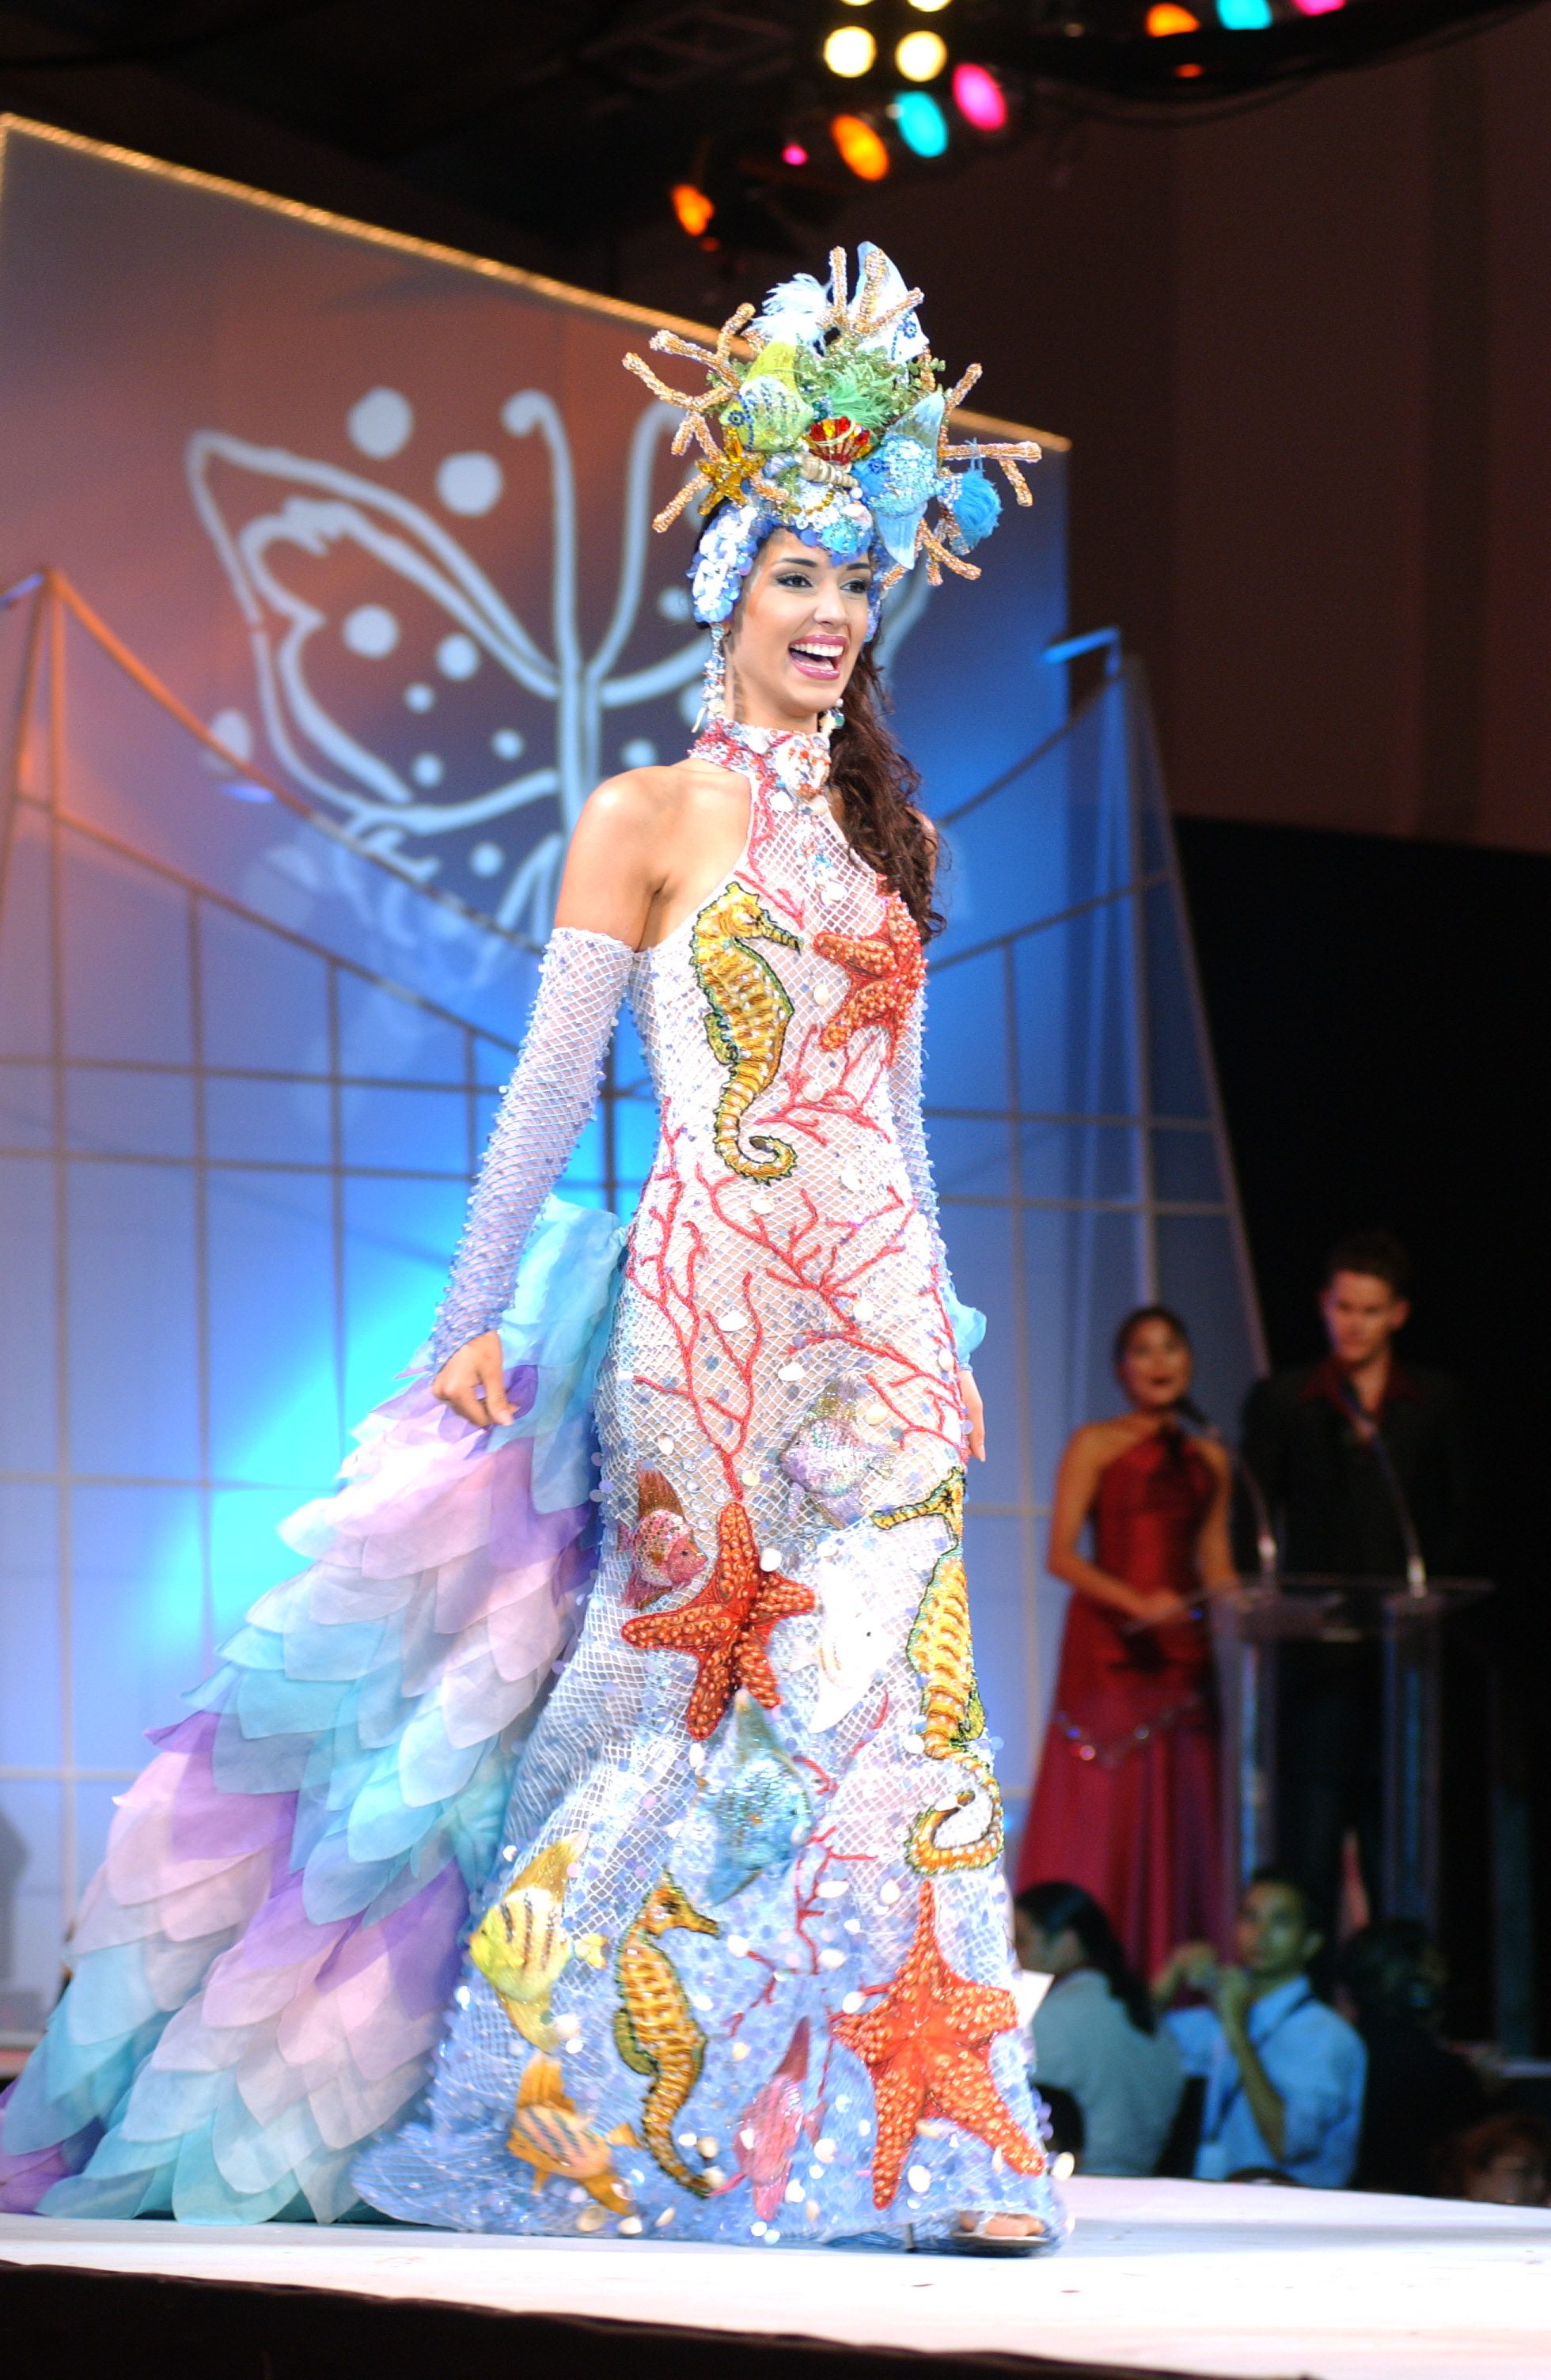 Amelia Vega, Miss Dominican Republic 2003, walks the runway after winning the 2003 Miss Universe National Costume show at the El Panama Hotel in Panama City, Panama. Photo from the Miss Universe Organization  